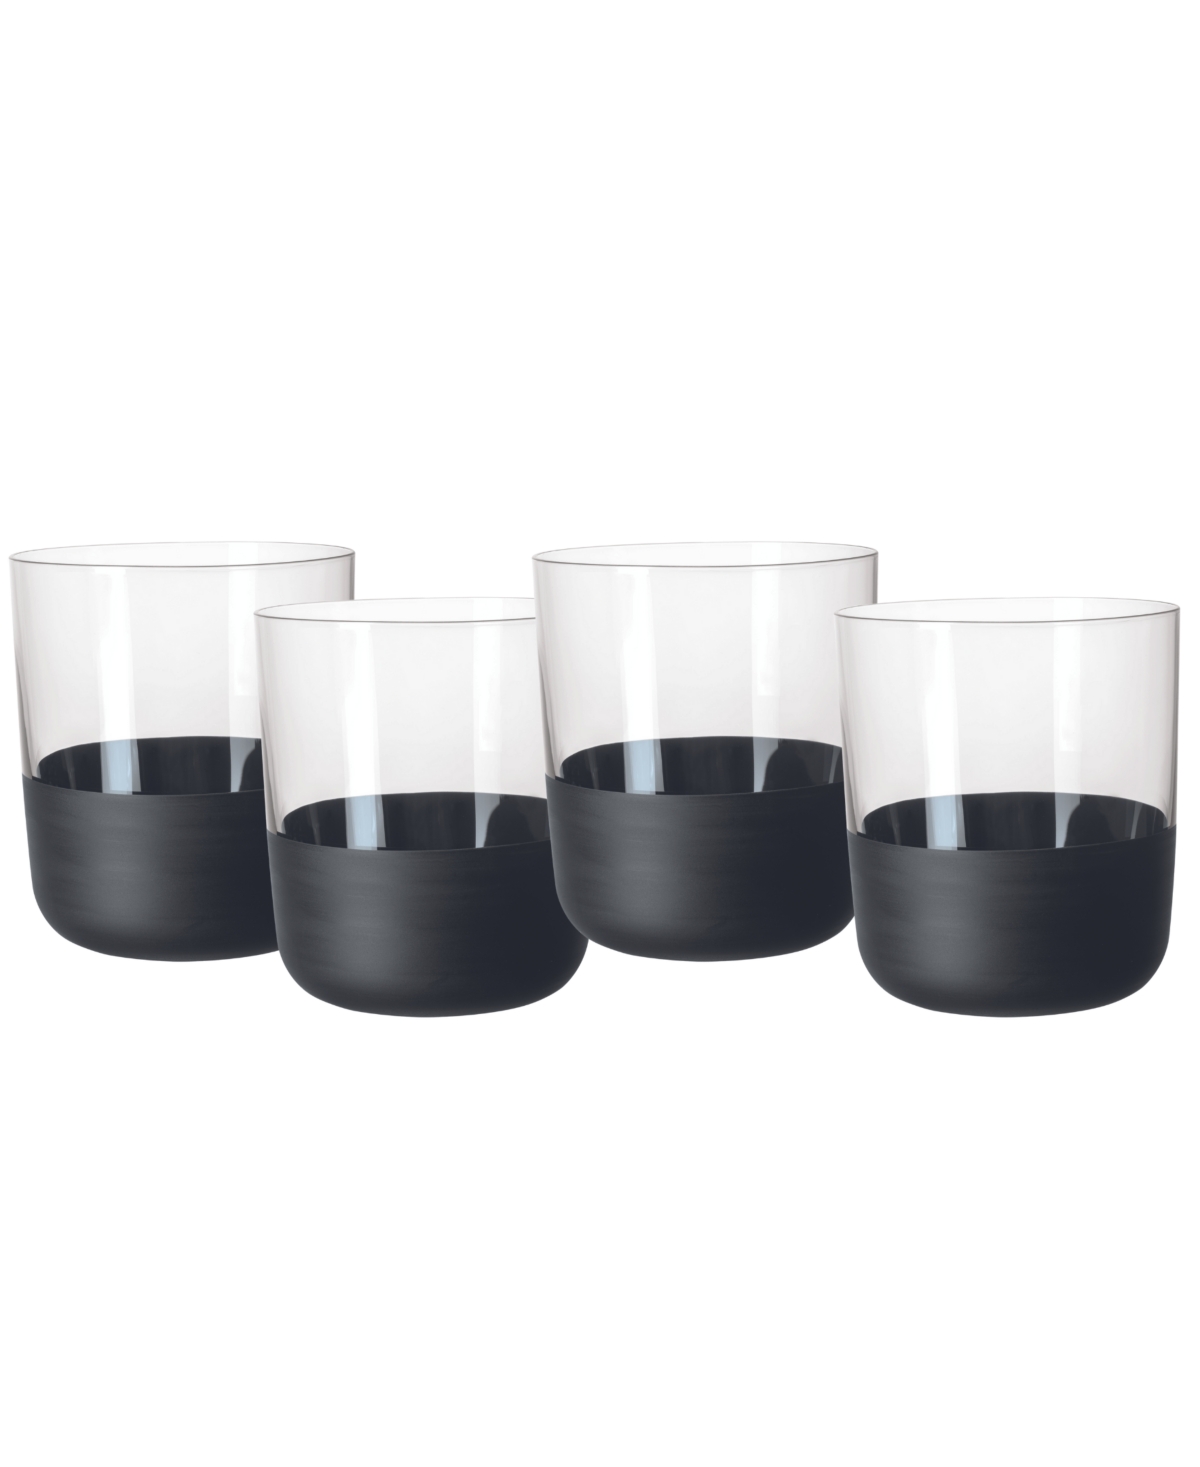 Villeroy & Boch Manufacture Crystal Rock Double Old Fashioned Glasses, Set of 4